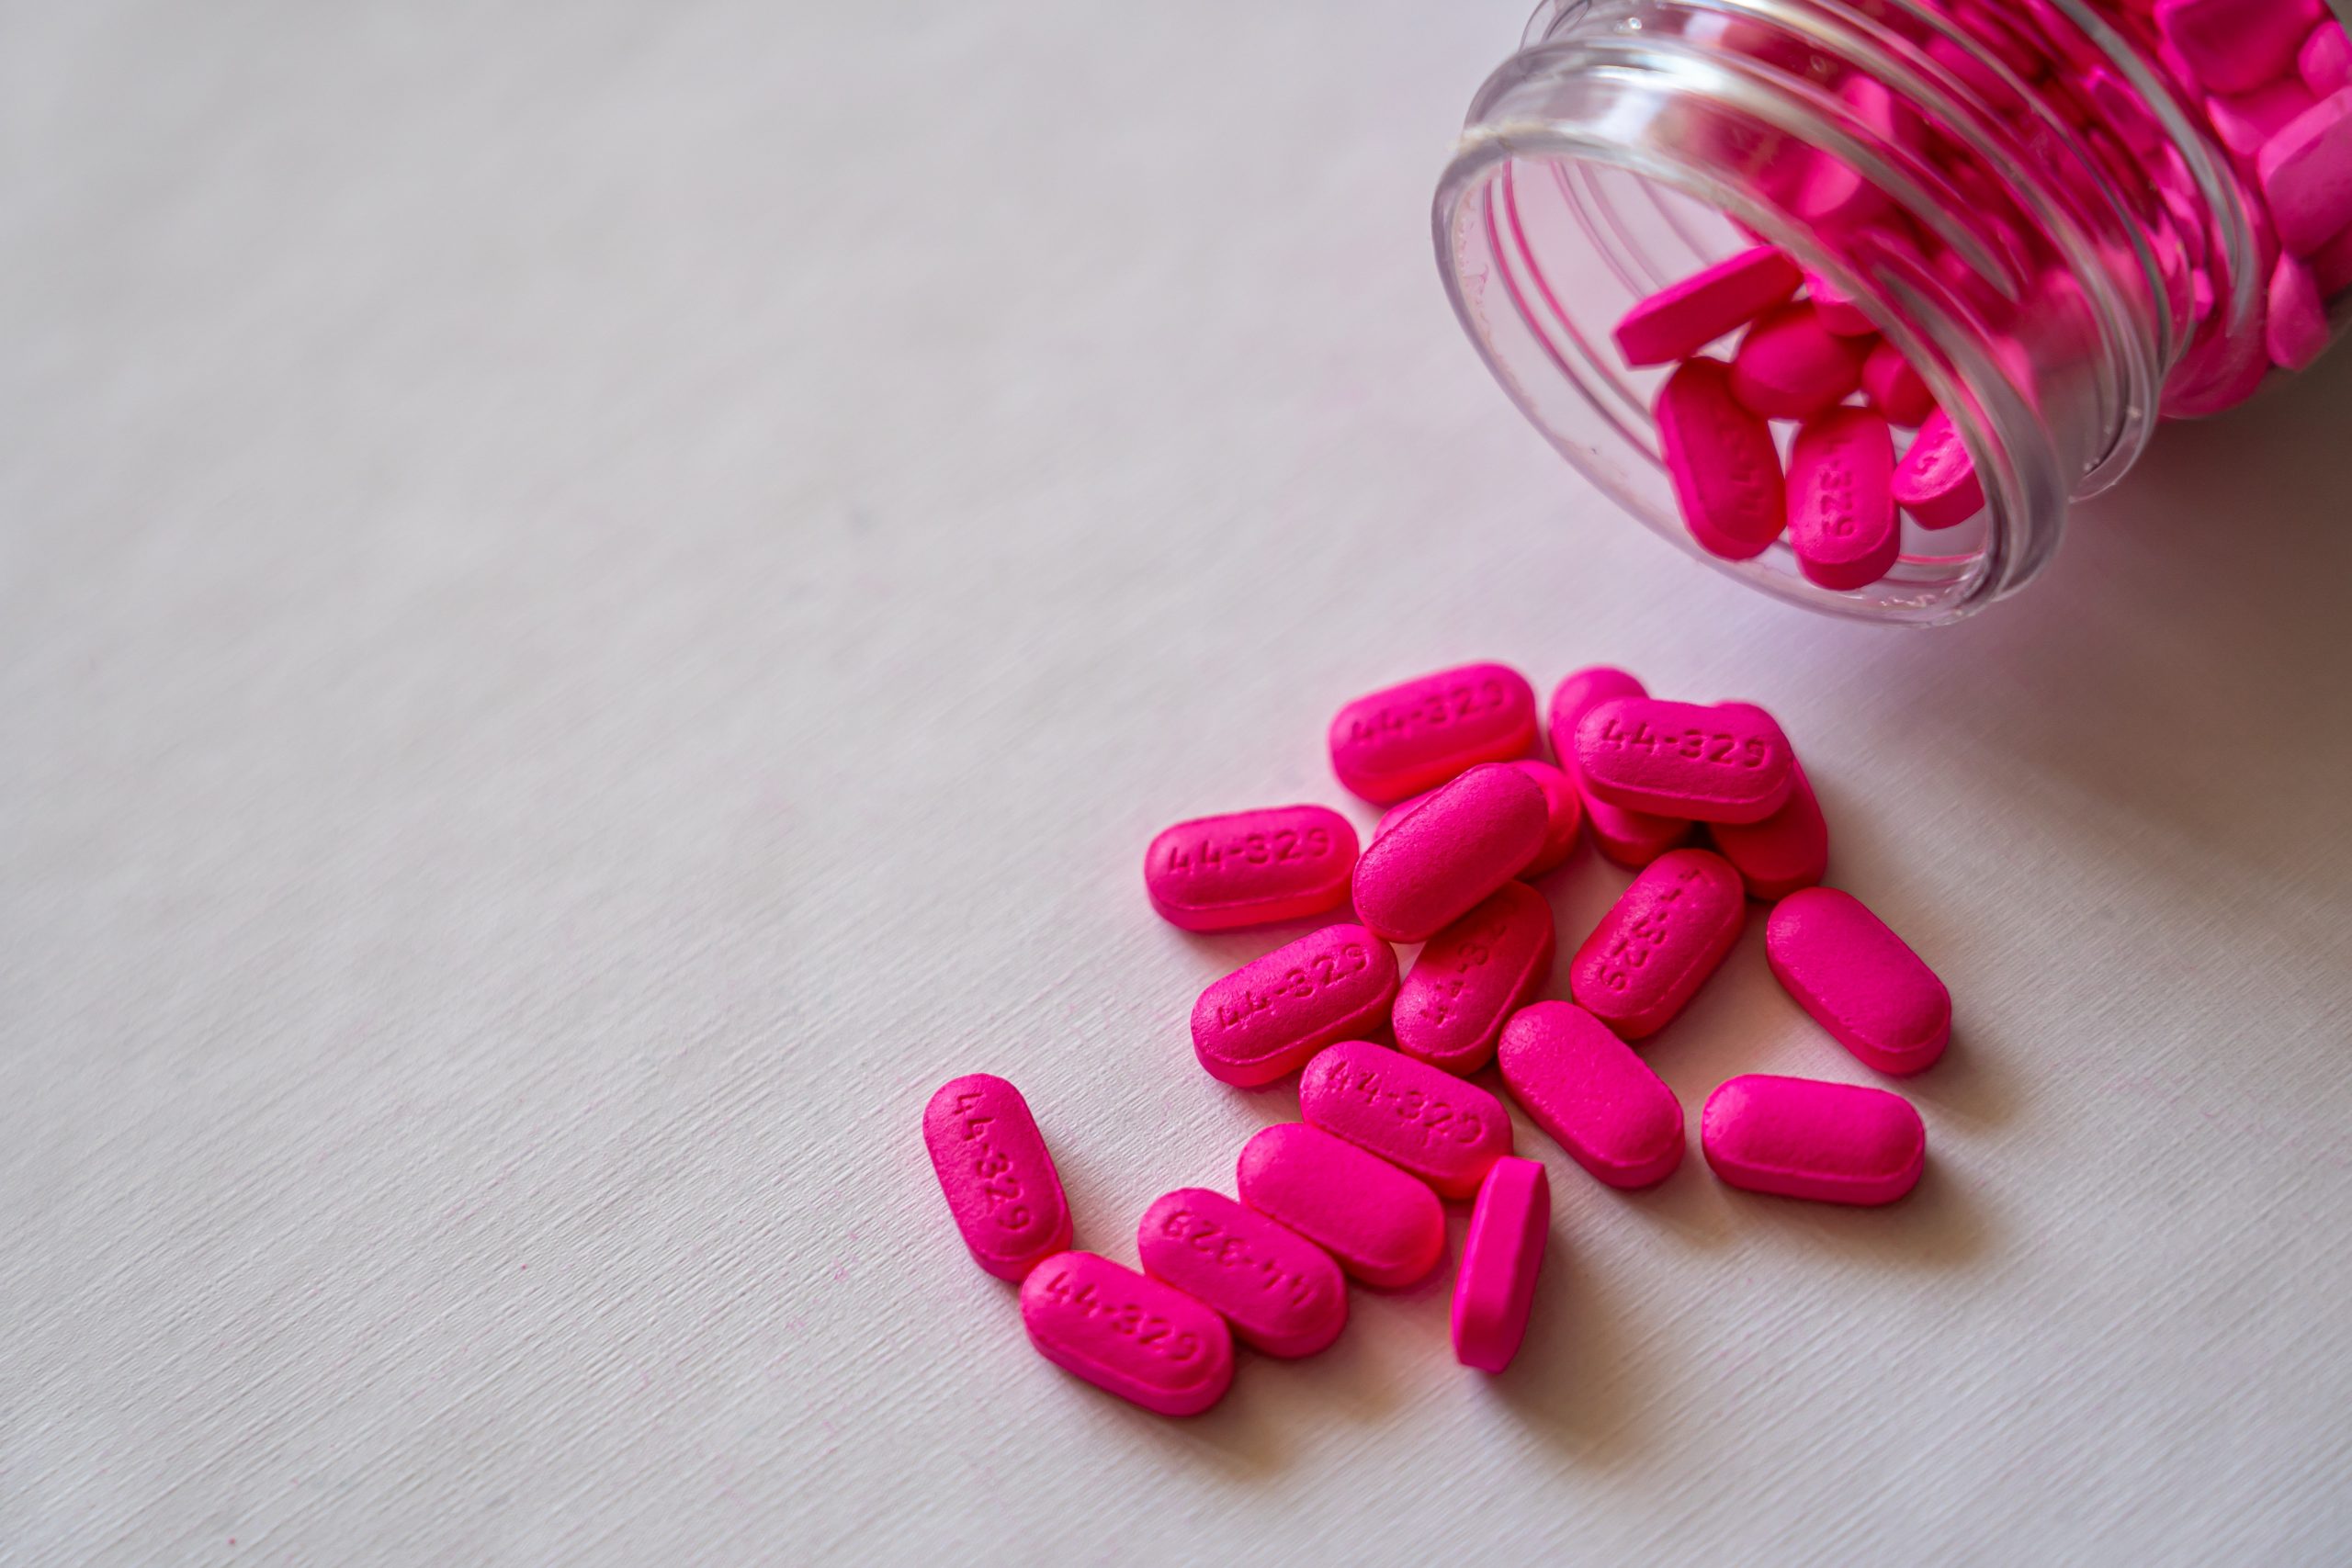 Dietary supplements – do you know enough about them?